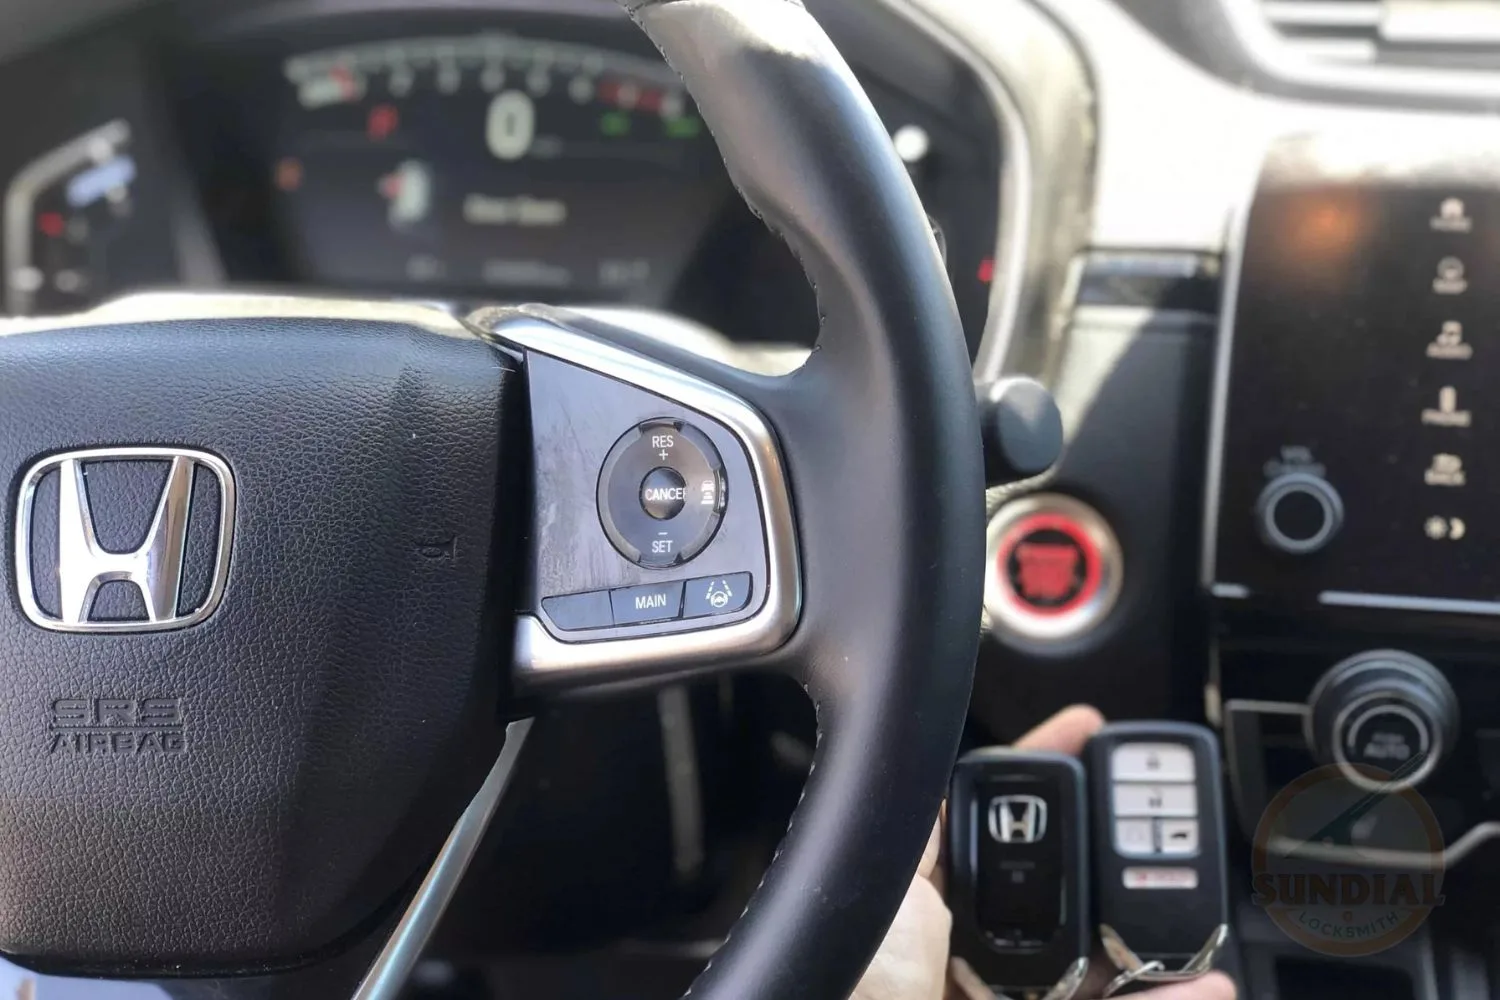 A Honda key fob held in the foreground with the steering wheel and vehicle control buttons of a Honda car in the background.